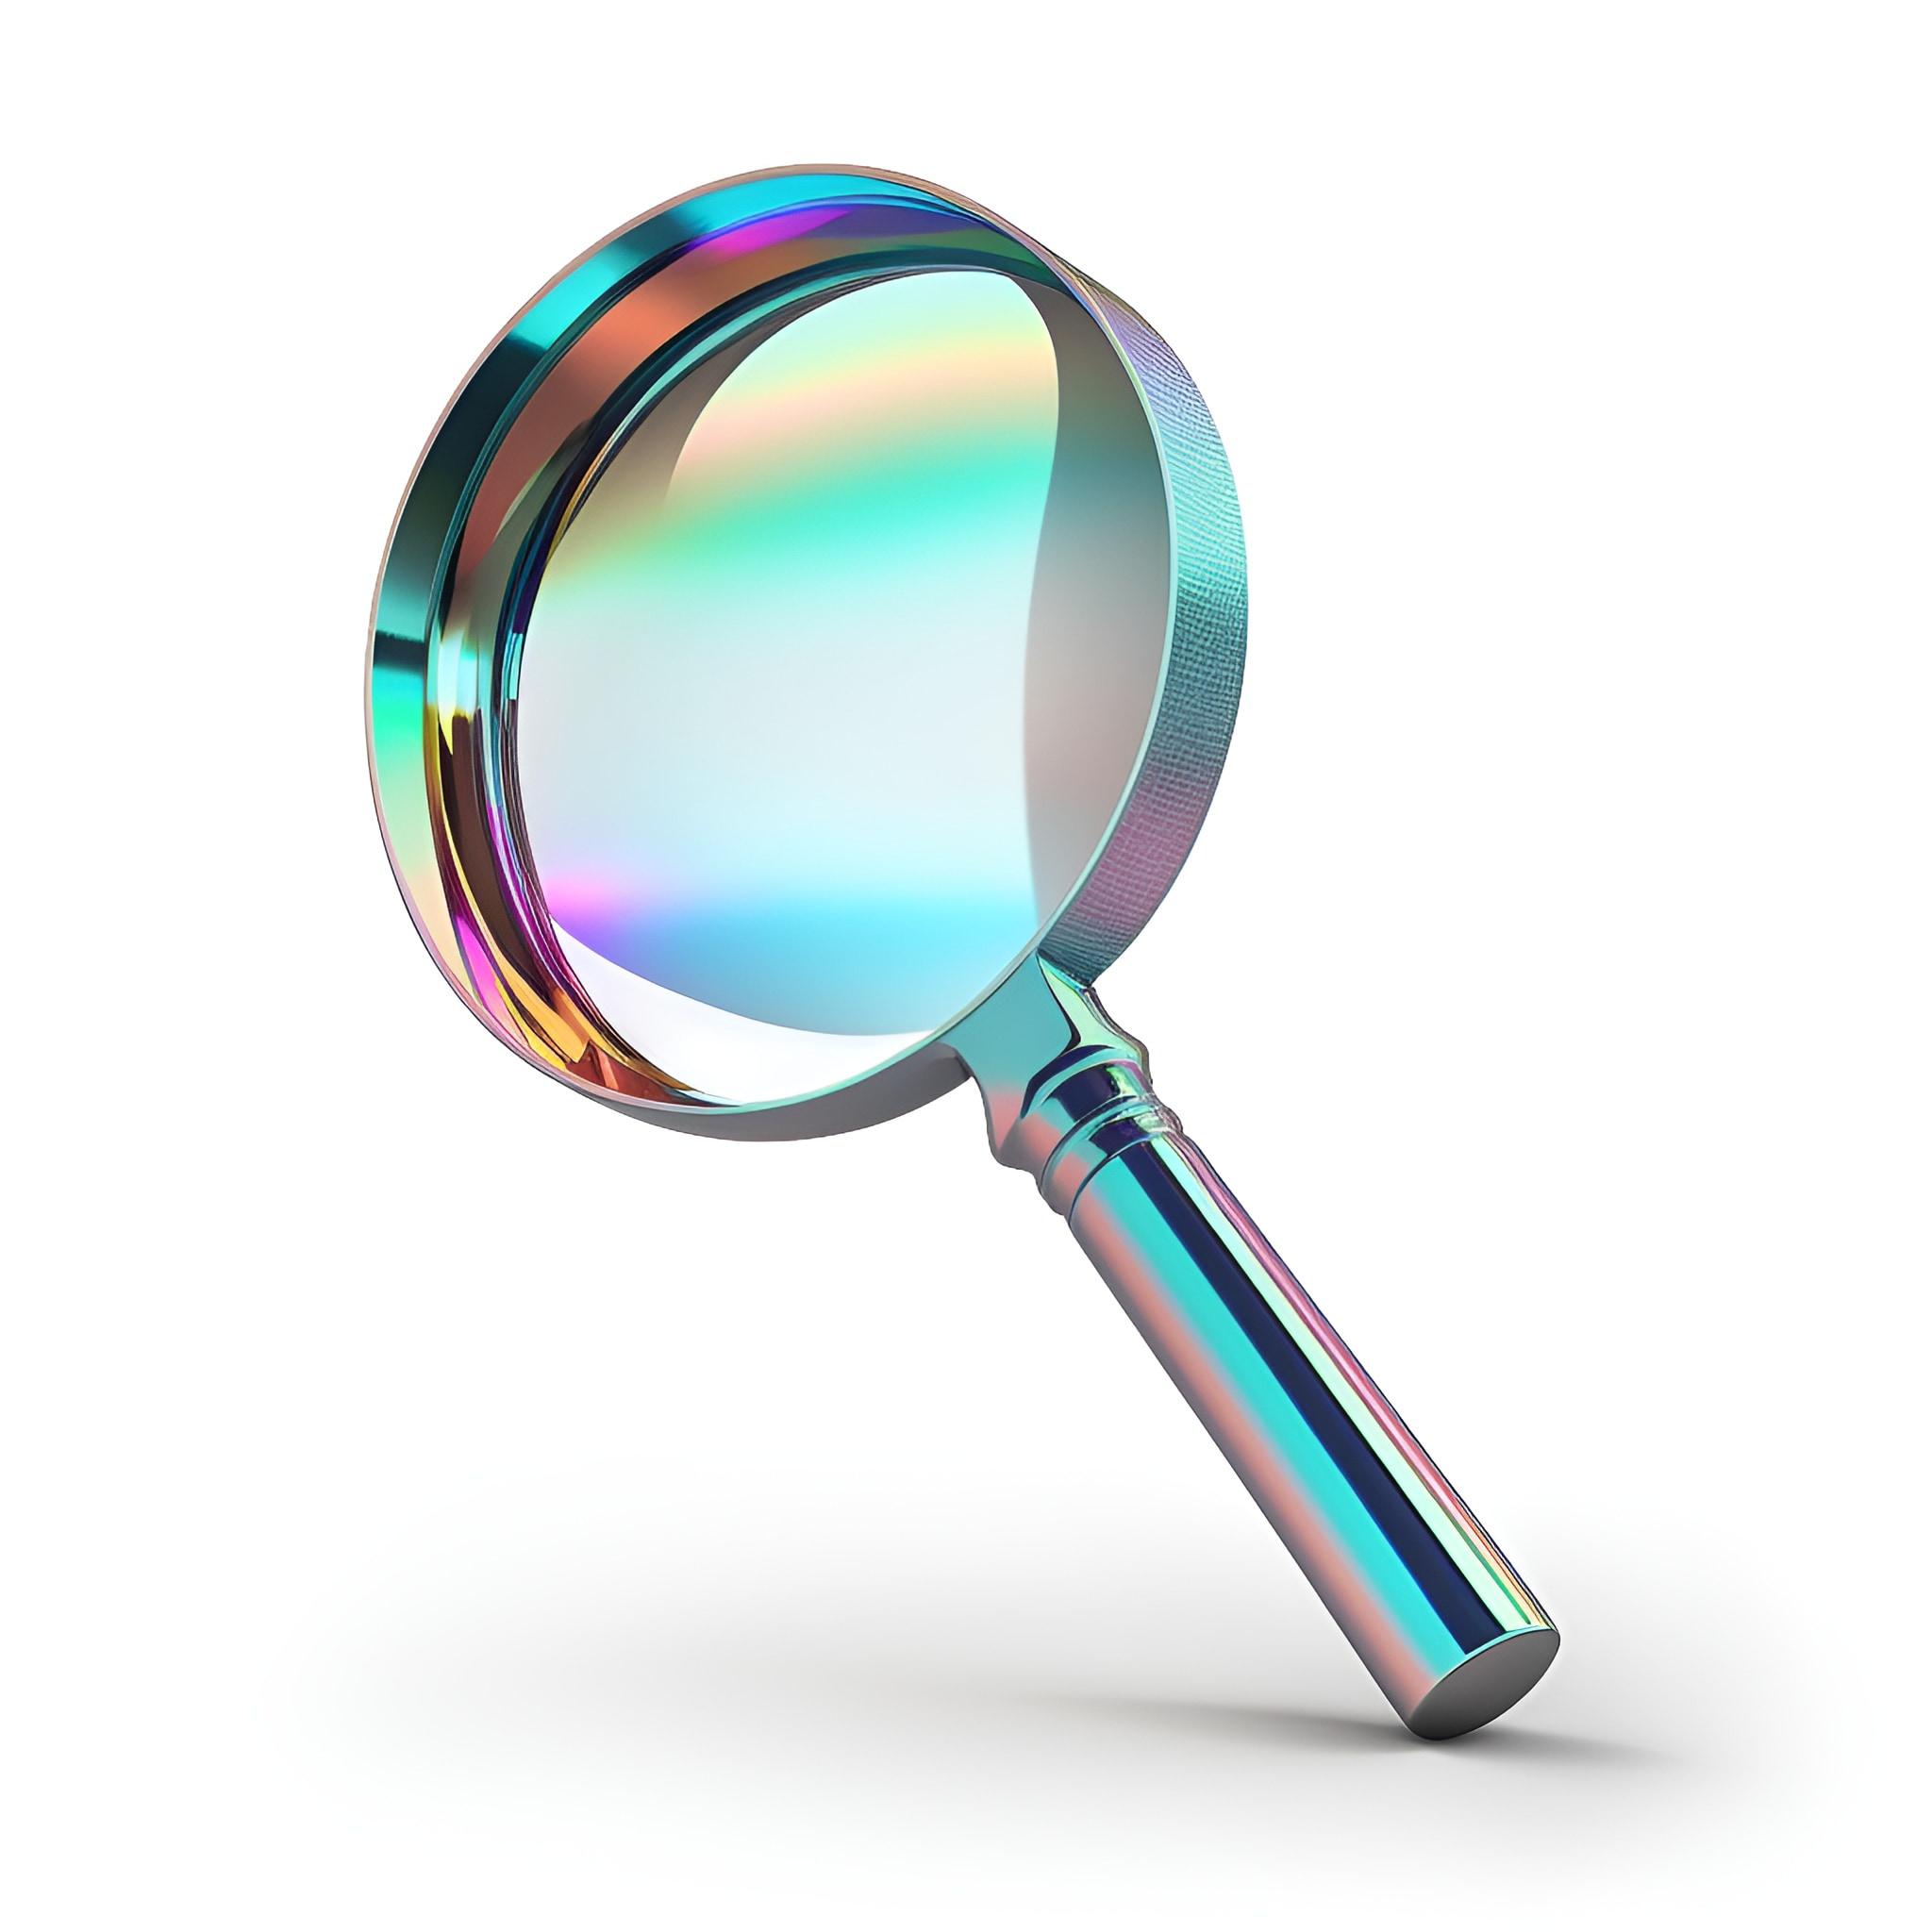 Shiny 3D model of simple magnifying glass, minimalist, radiating gradient hues, silver, shiny, mirror, white background